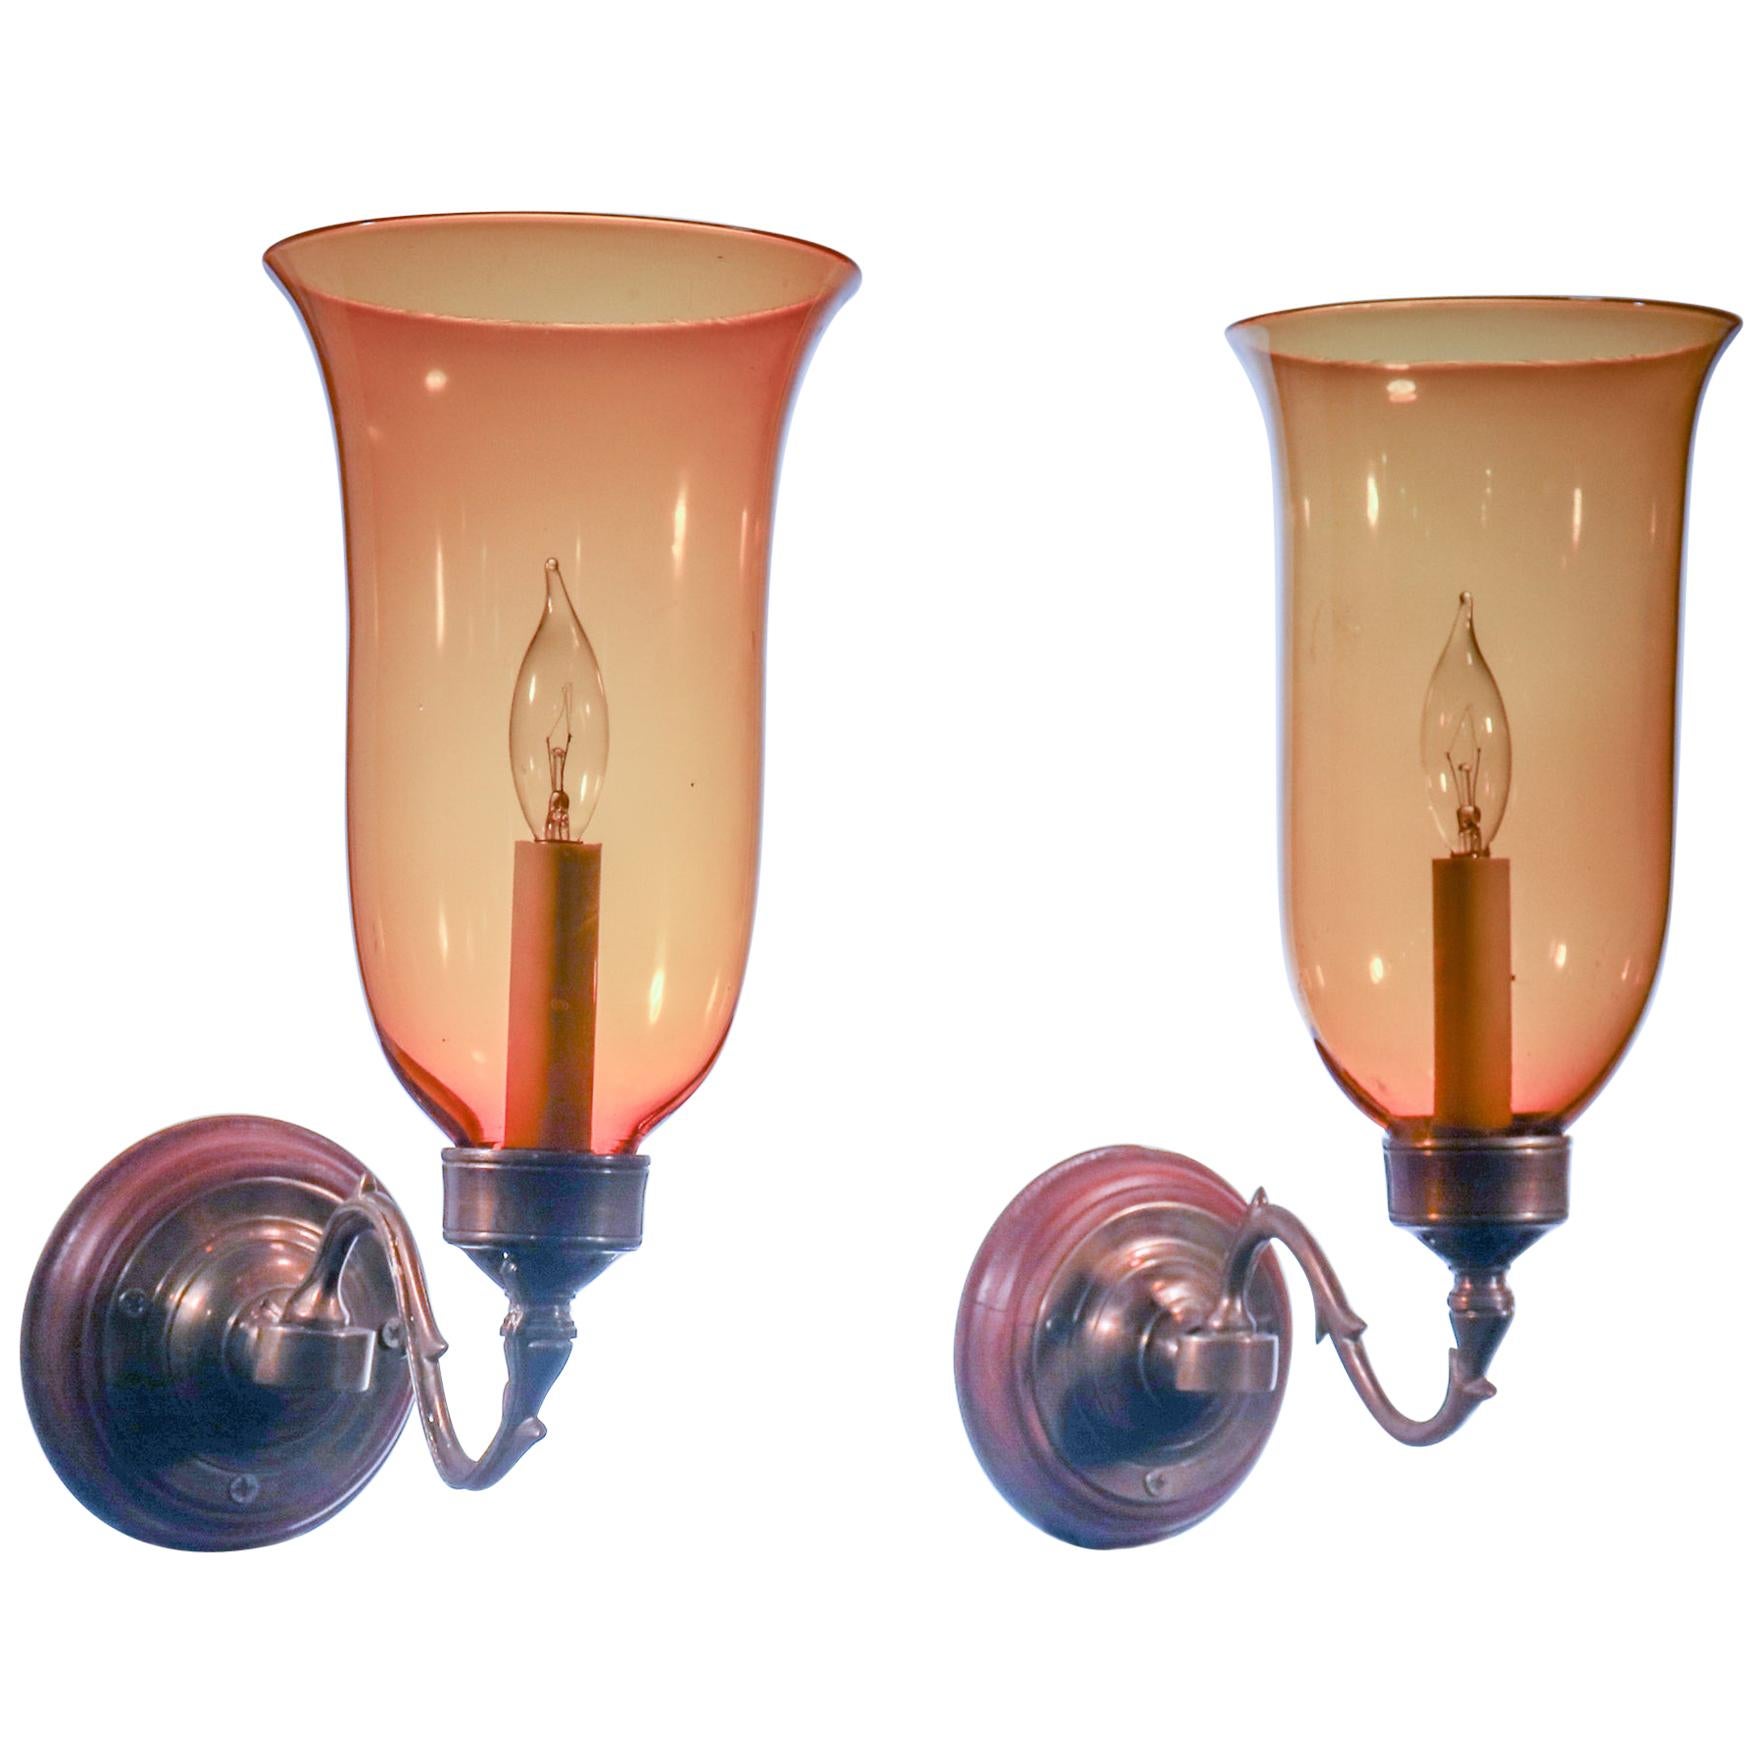 Antique Hurricane Shade Wall Sconces with Amber Colored Glass